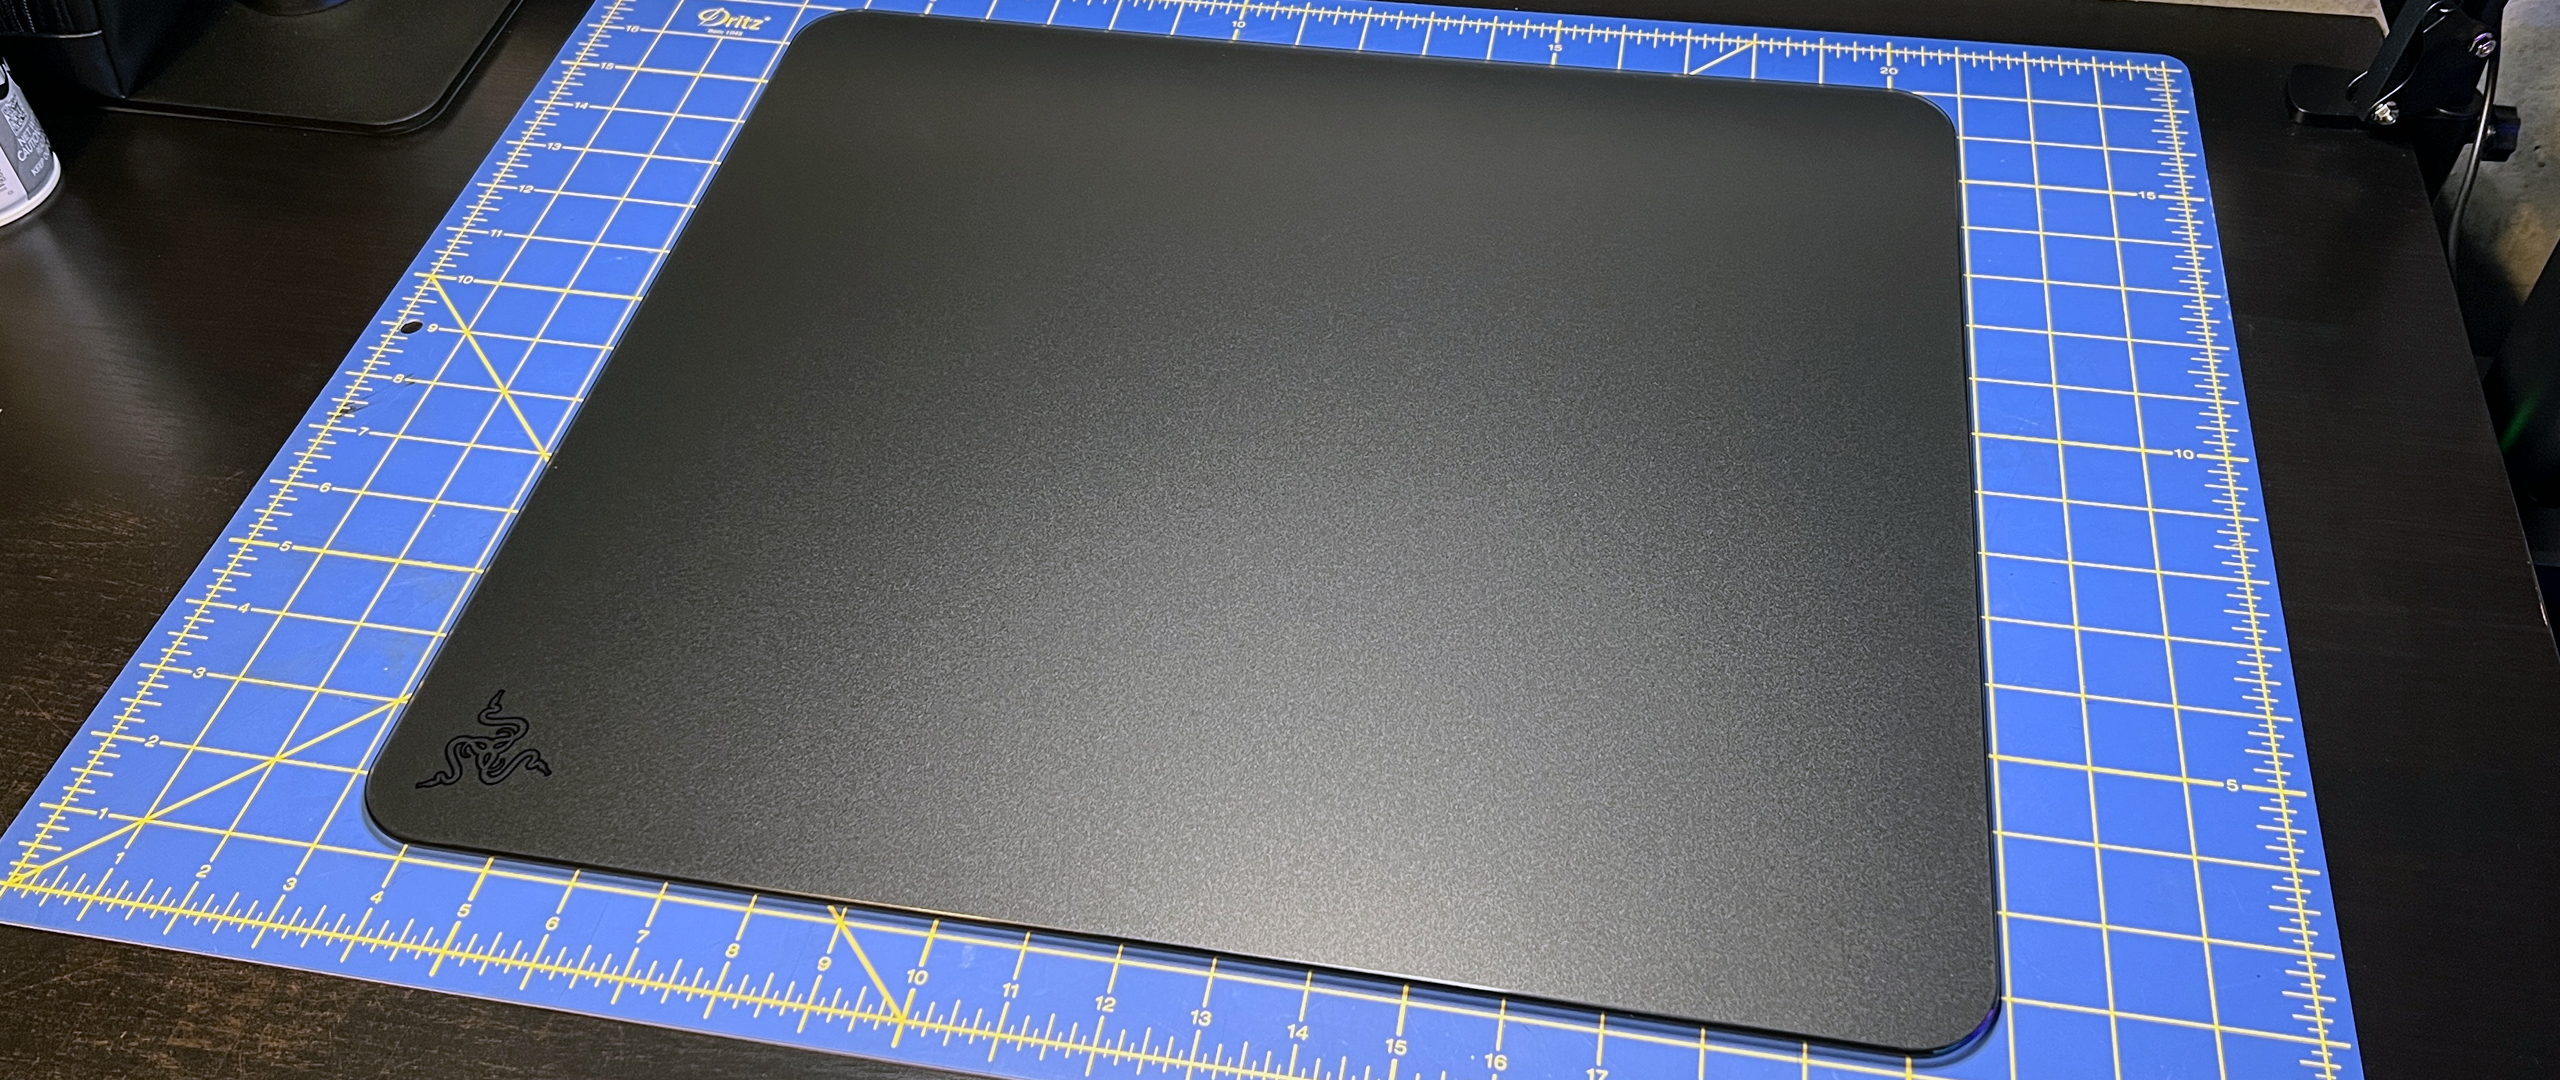 Razer Atlas Hands-On: Who Knew I Needed a $100 Glass Mouse Pad